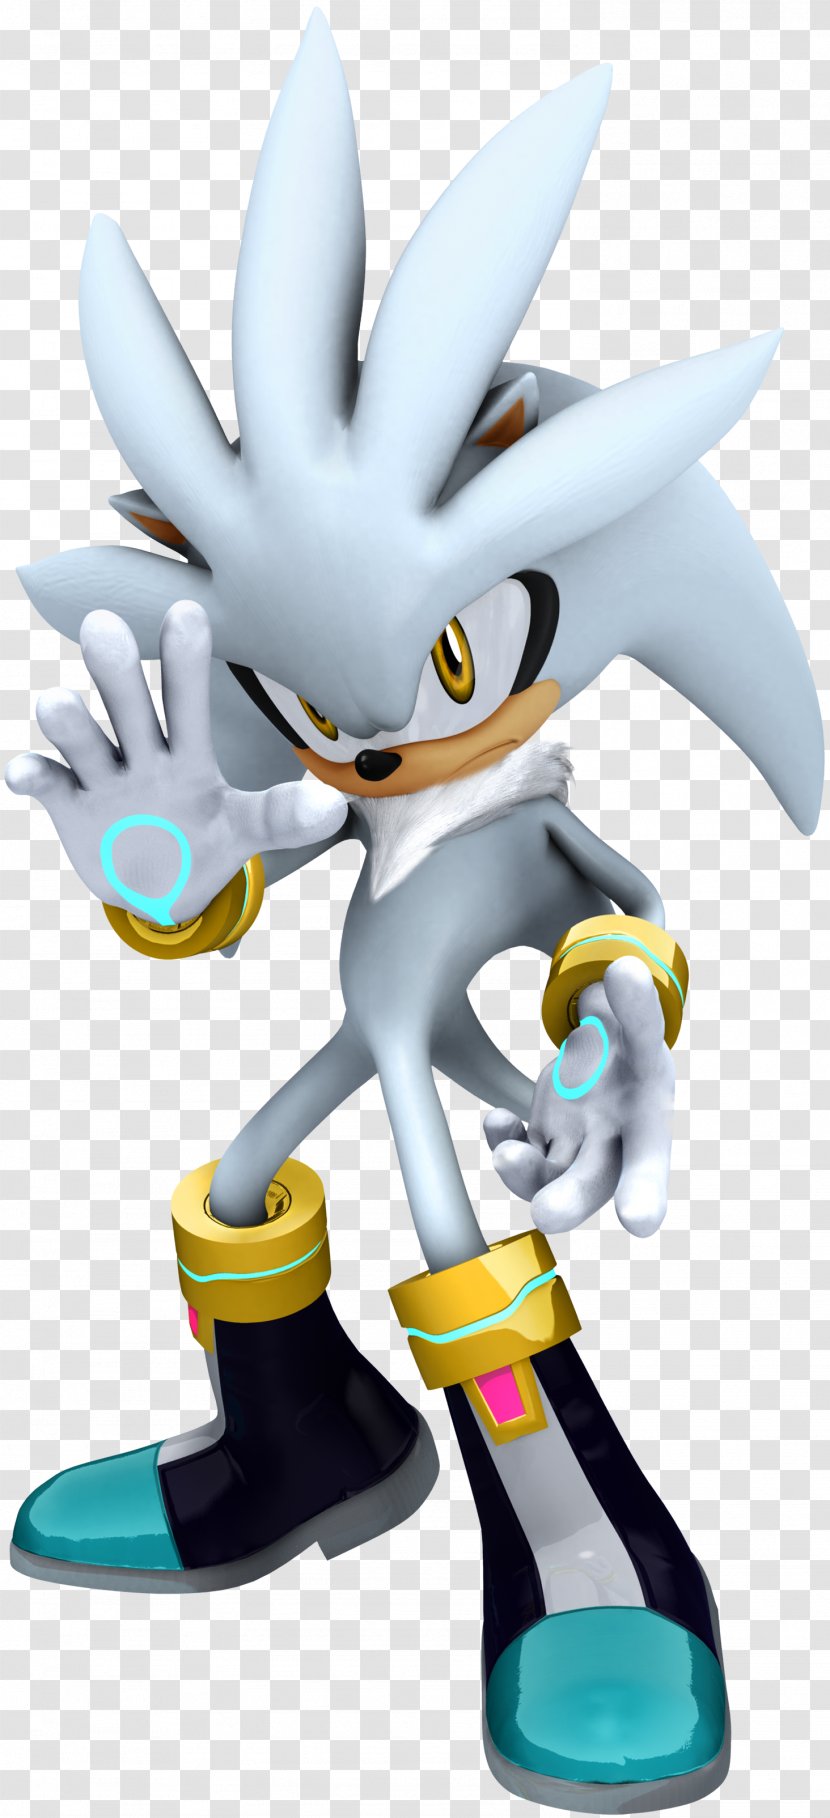 Sonic The Hedgehog Unleashed & Knuckles Doctor Eggman Echidna - Wing - Silver Transparent PNG